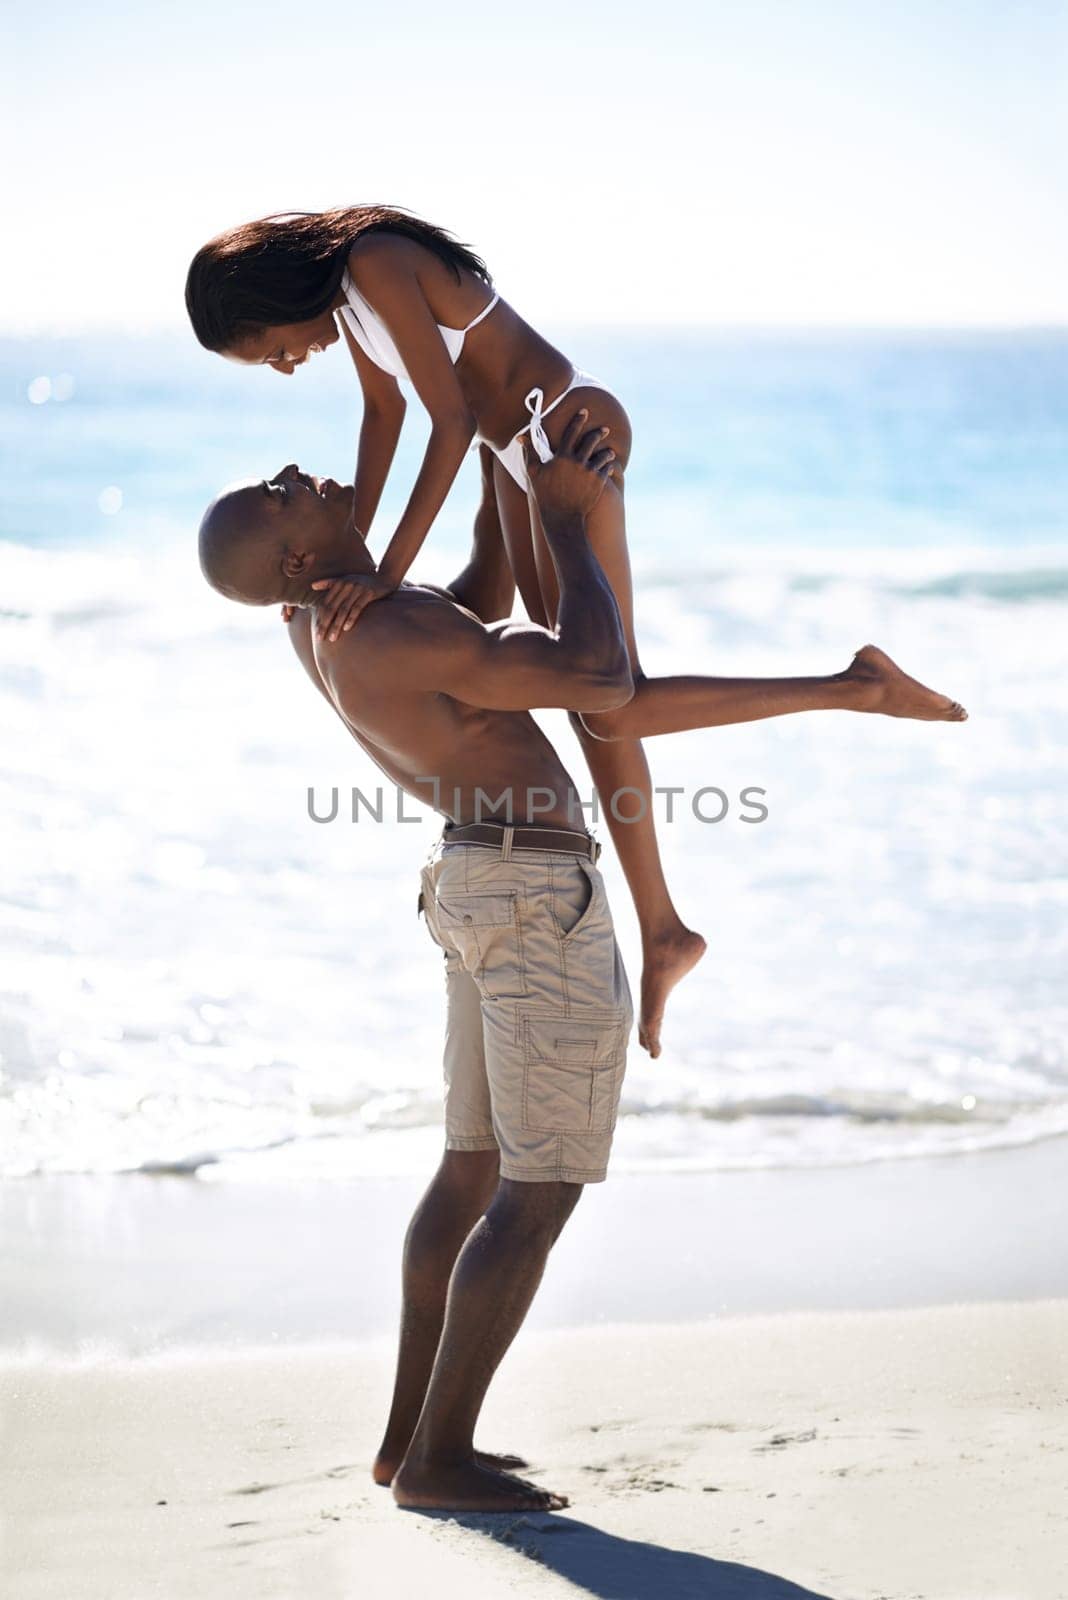 Lifting, hug and couple at a beach with love, romance and bonding in nature together. Support, travel and black people embrace at sea with freedom, energy and excited for summer, vacation or trip by YuriArcurs